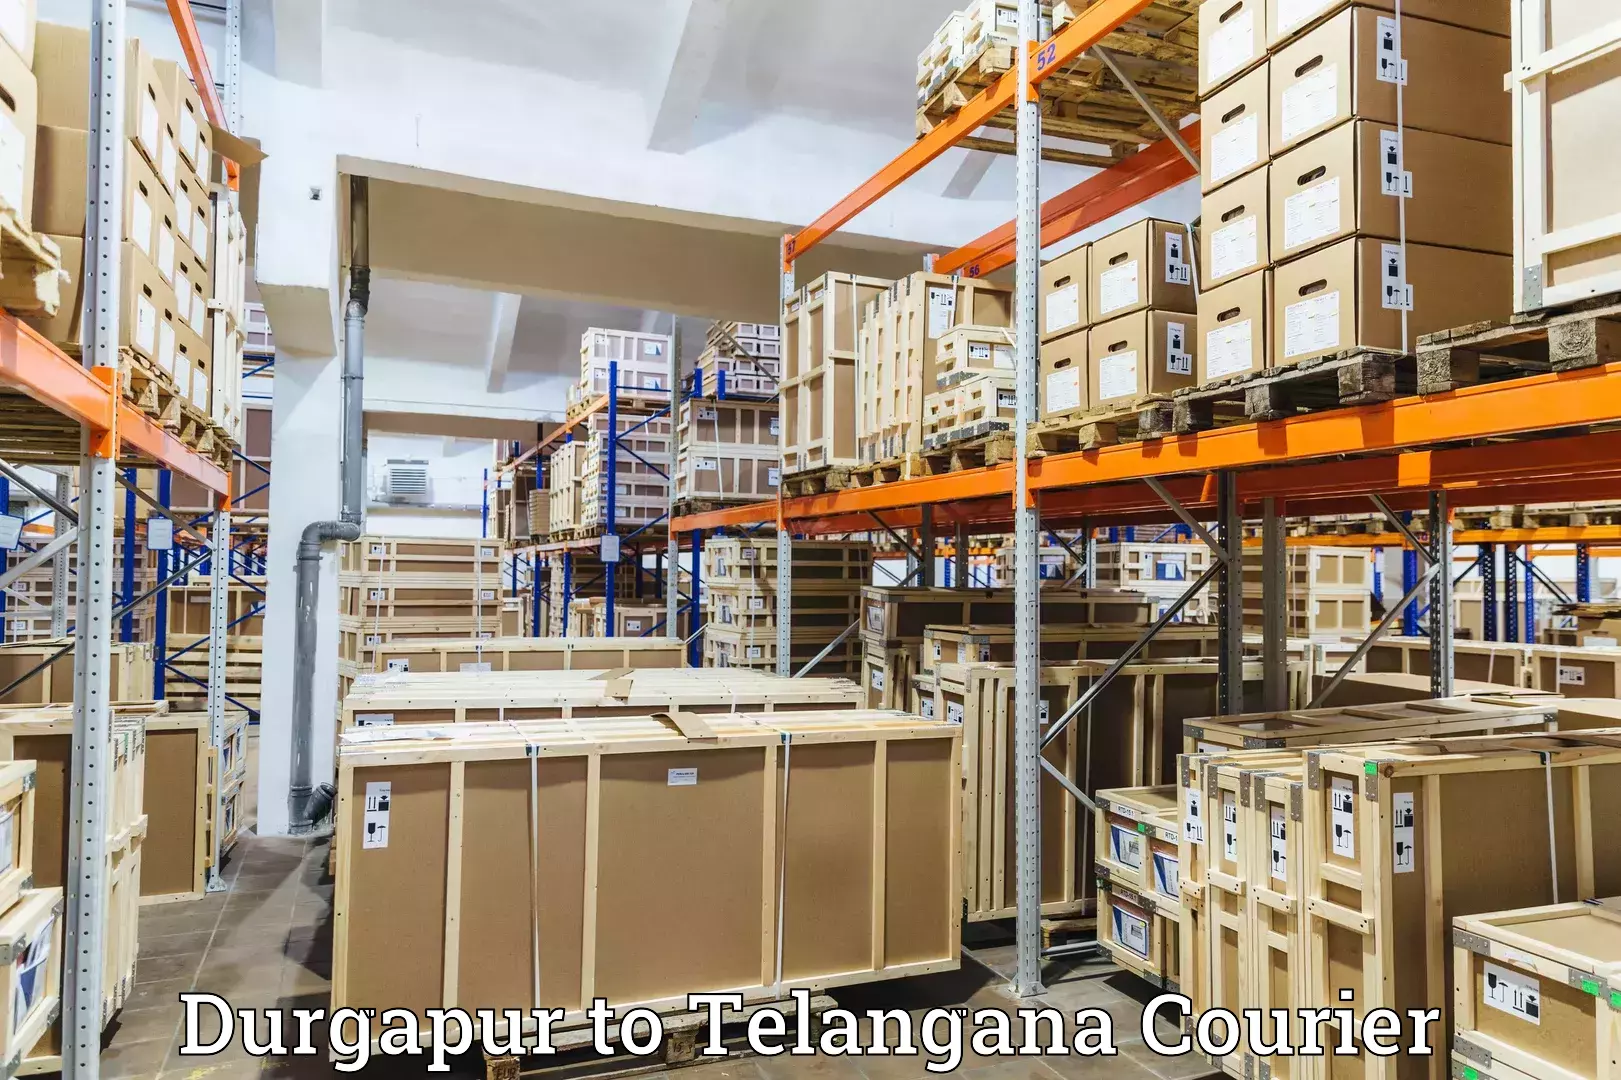 Tech-enabled shipping Durgapur to Allapalli